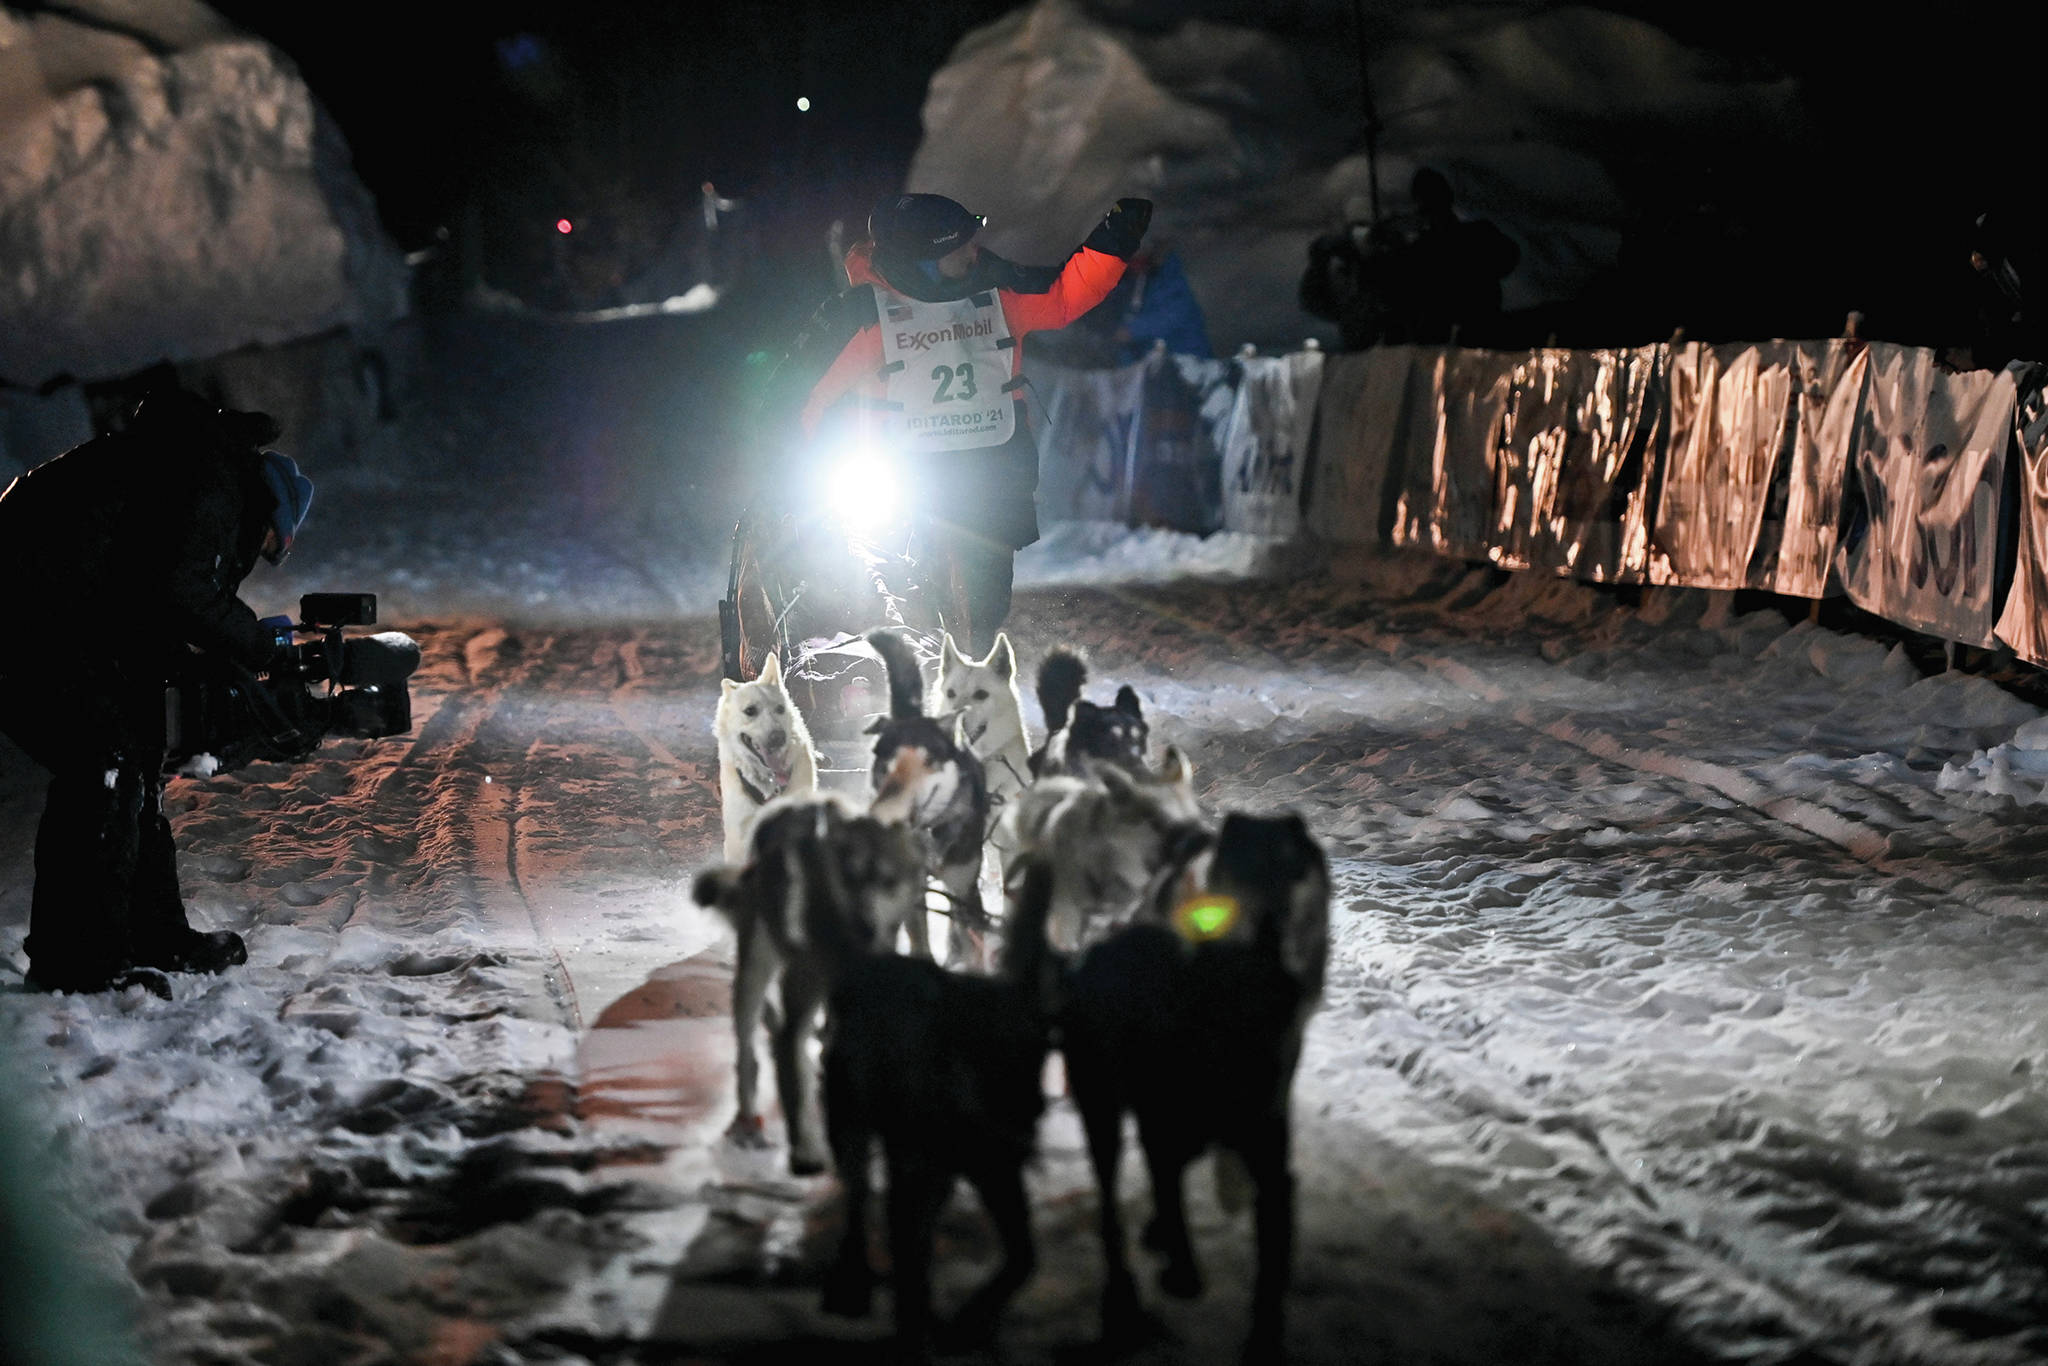 Dallas Seavey’s team runs into the chute near the finish line of the Iditarod Trail Sled Dog Race race near Willow, Alaska, early Monday, March 15, 2021. Seavey has won the Iditarod and matched a milestone in the world’s most famous sled dog race. It’s the fifth title for the 34-year-old Seavey, matching the record of most wins by any musher. (Marc Lester/Anchorage Daily News via AP)